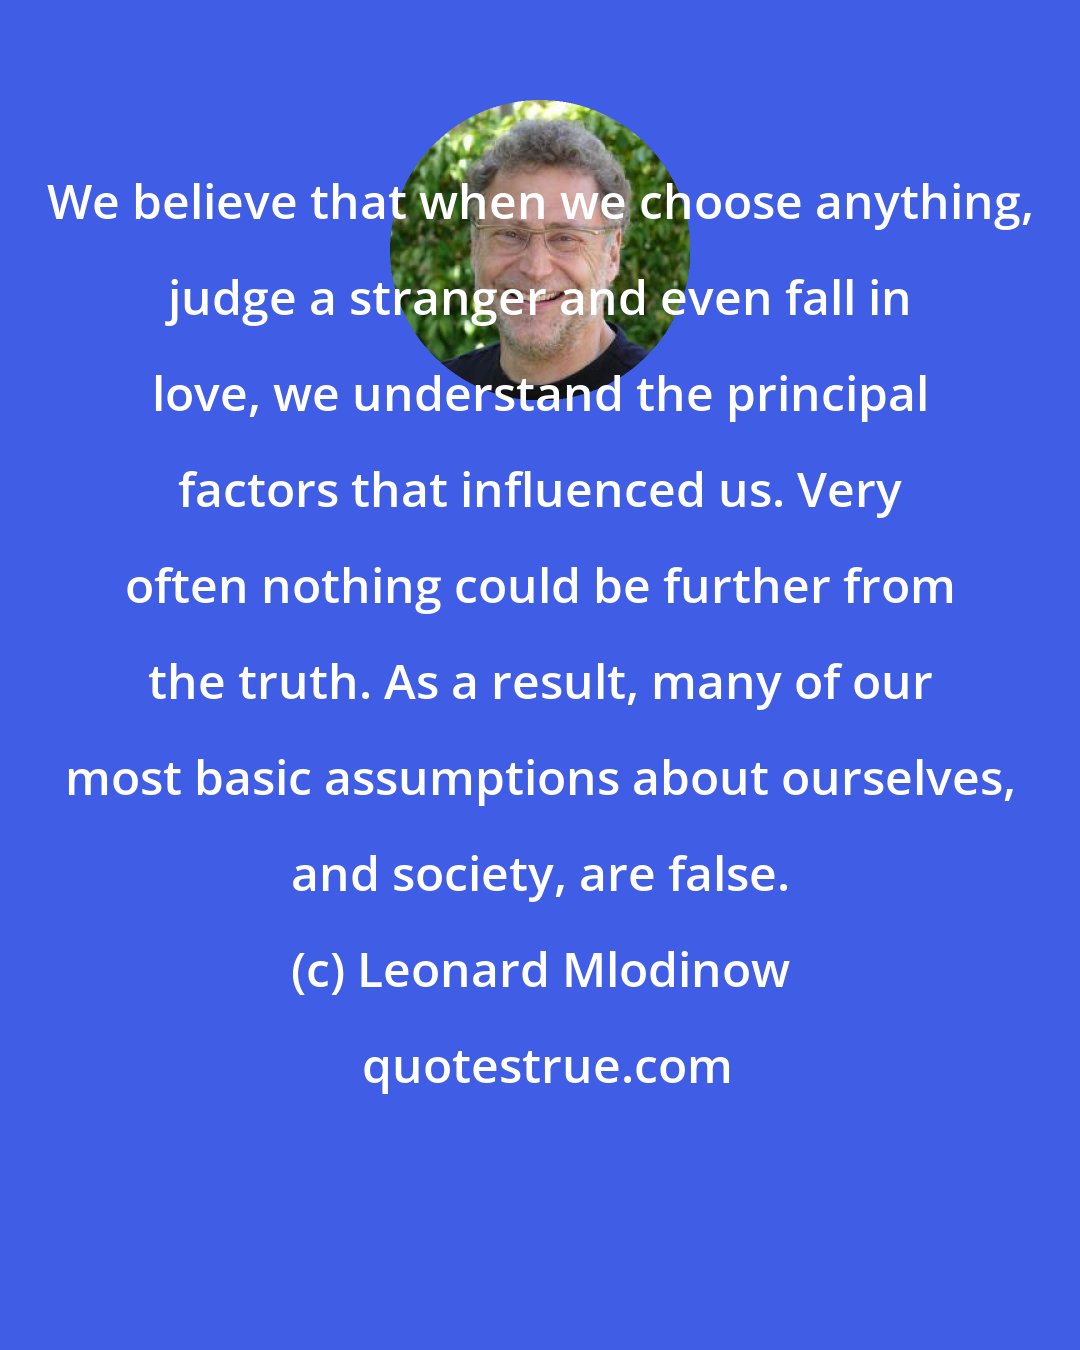 Leonard Mlodinow: We believe that when we choose anything, judge a stranger and even fall in love, we understand the principal factors that influenced us. Very often nothing could be further from the truth. As a result, many of our most basic assumptions about ourselves, and society, are false.